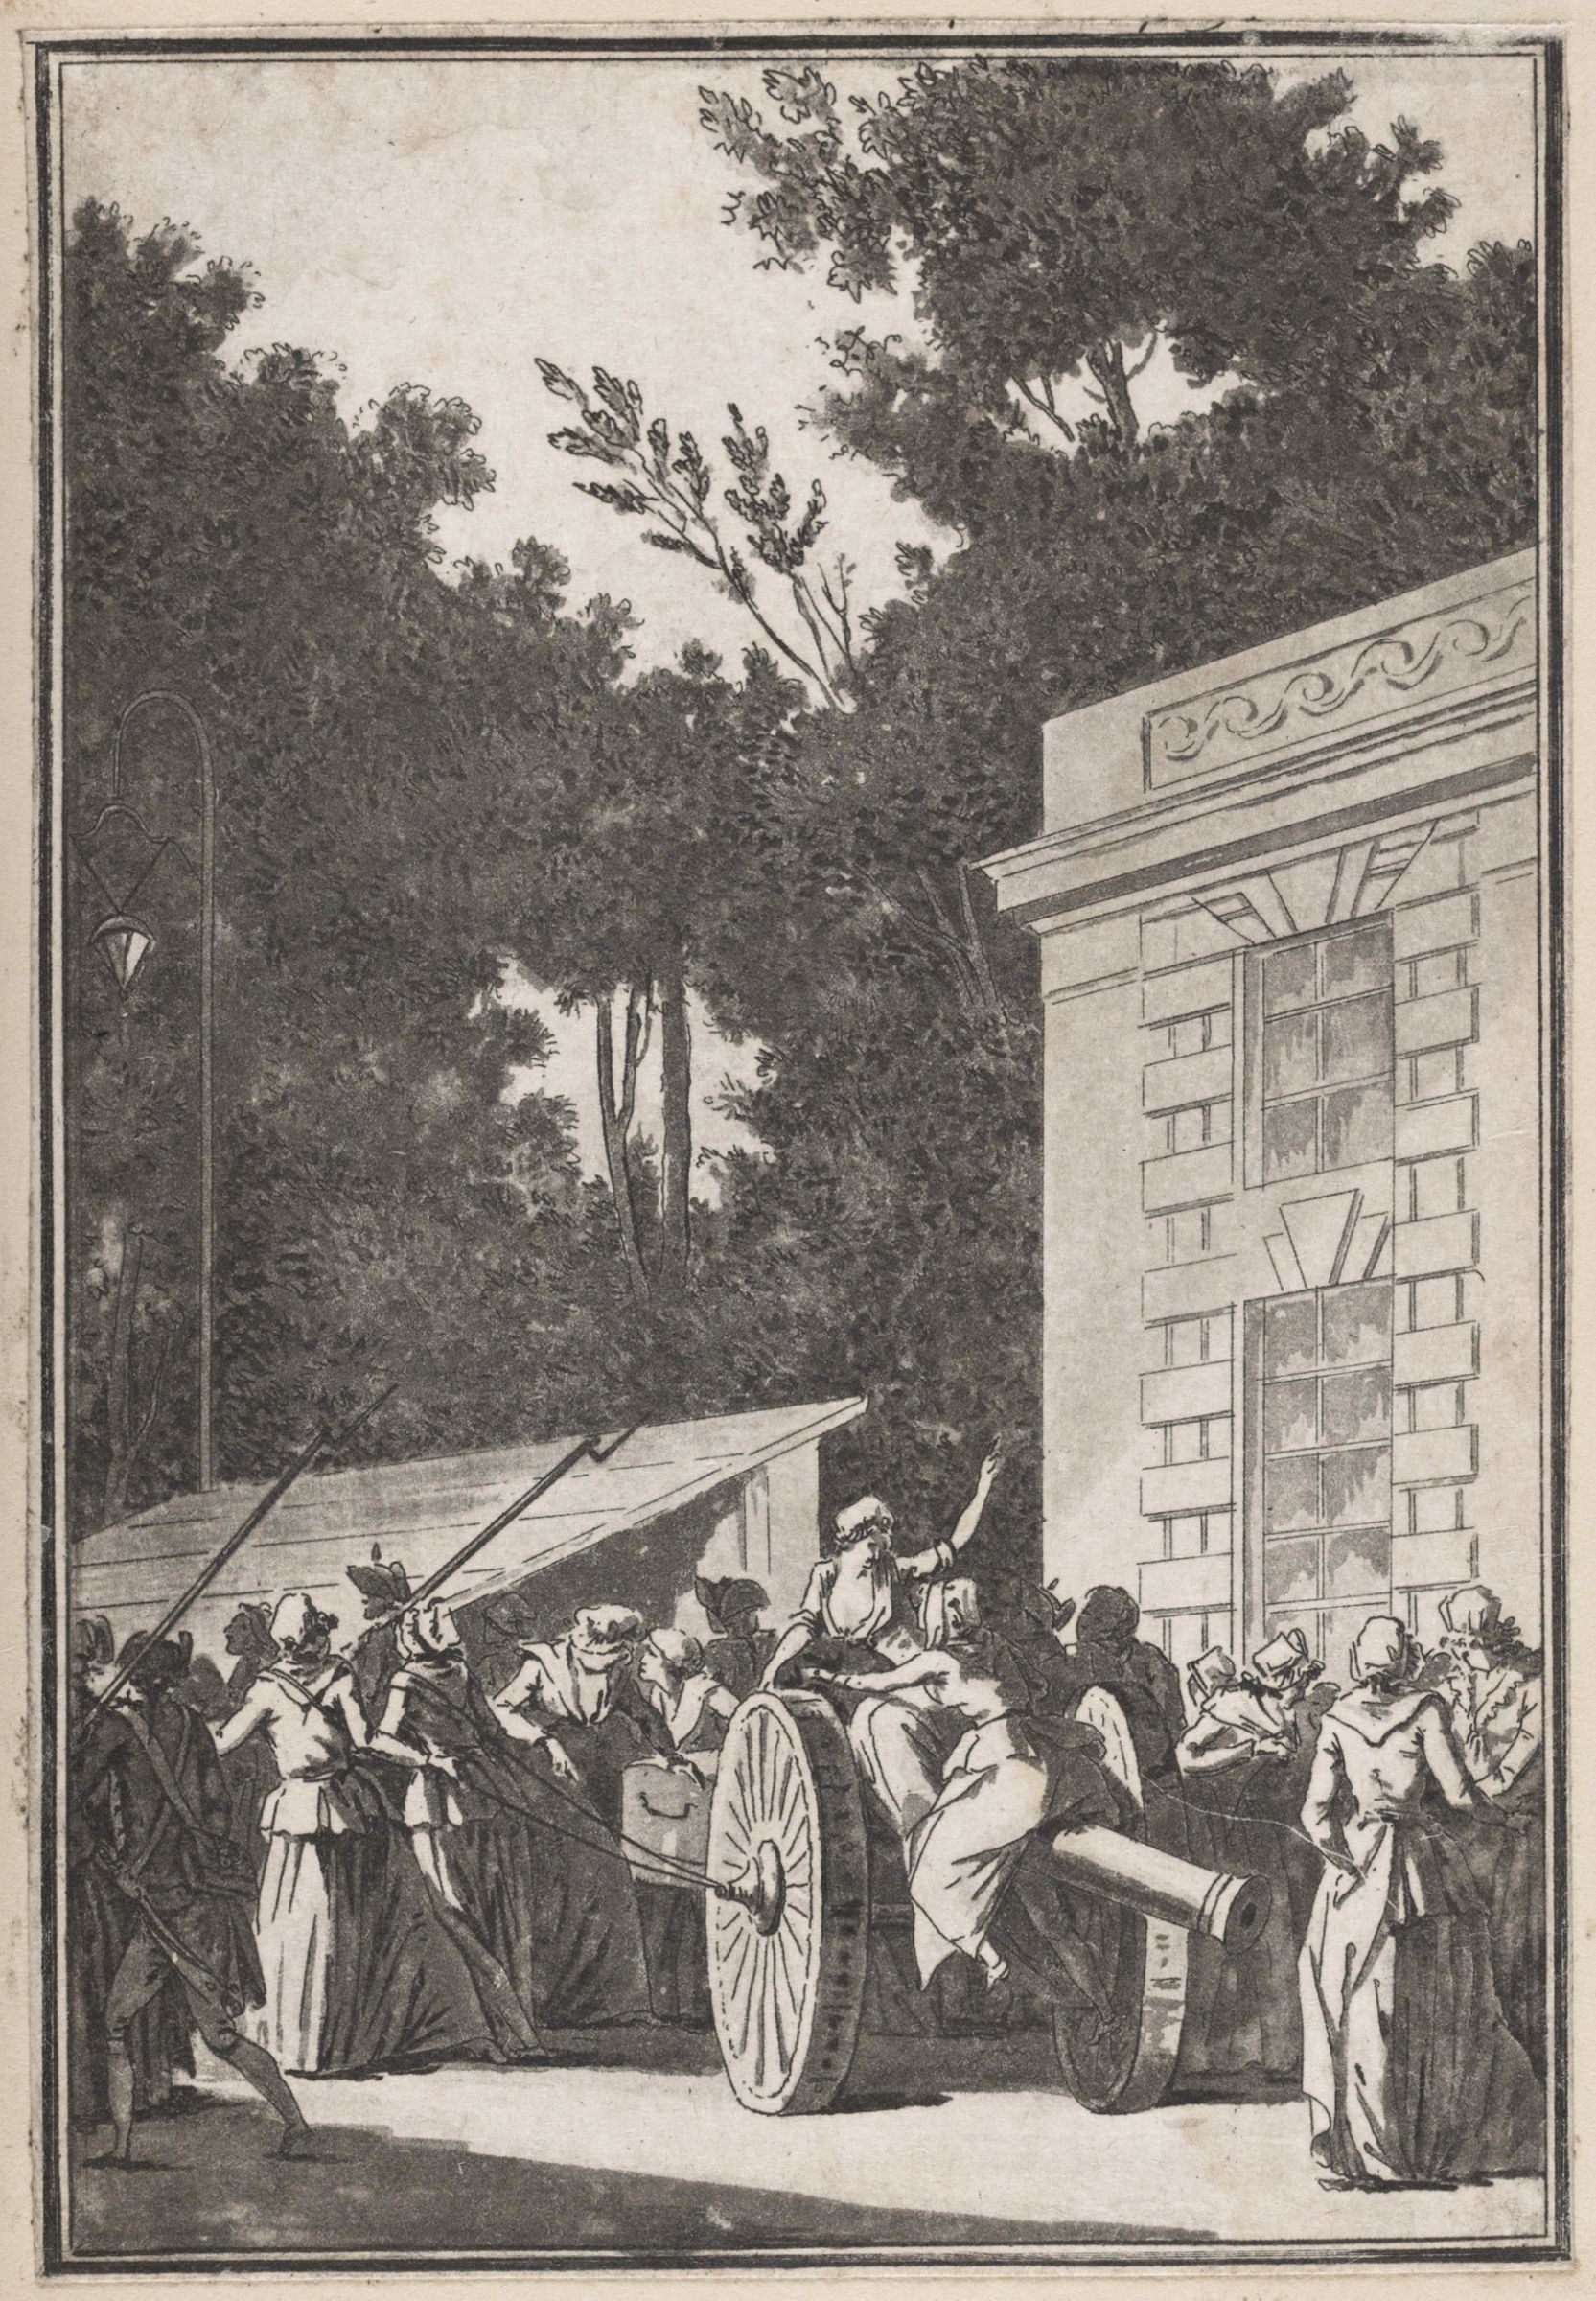 Jean François Jainet (French, 1752 - 1814), Parisian Women March on Versailles (5 October 1789). Print, 5 1/8 x 3 9/16 in. Gift of Patrice Higonnet. Image courtesy of Harvard Art Museums/ Fogg Museum.